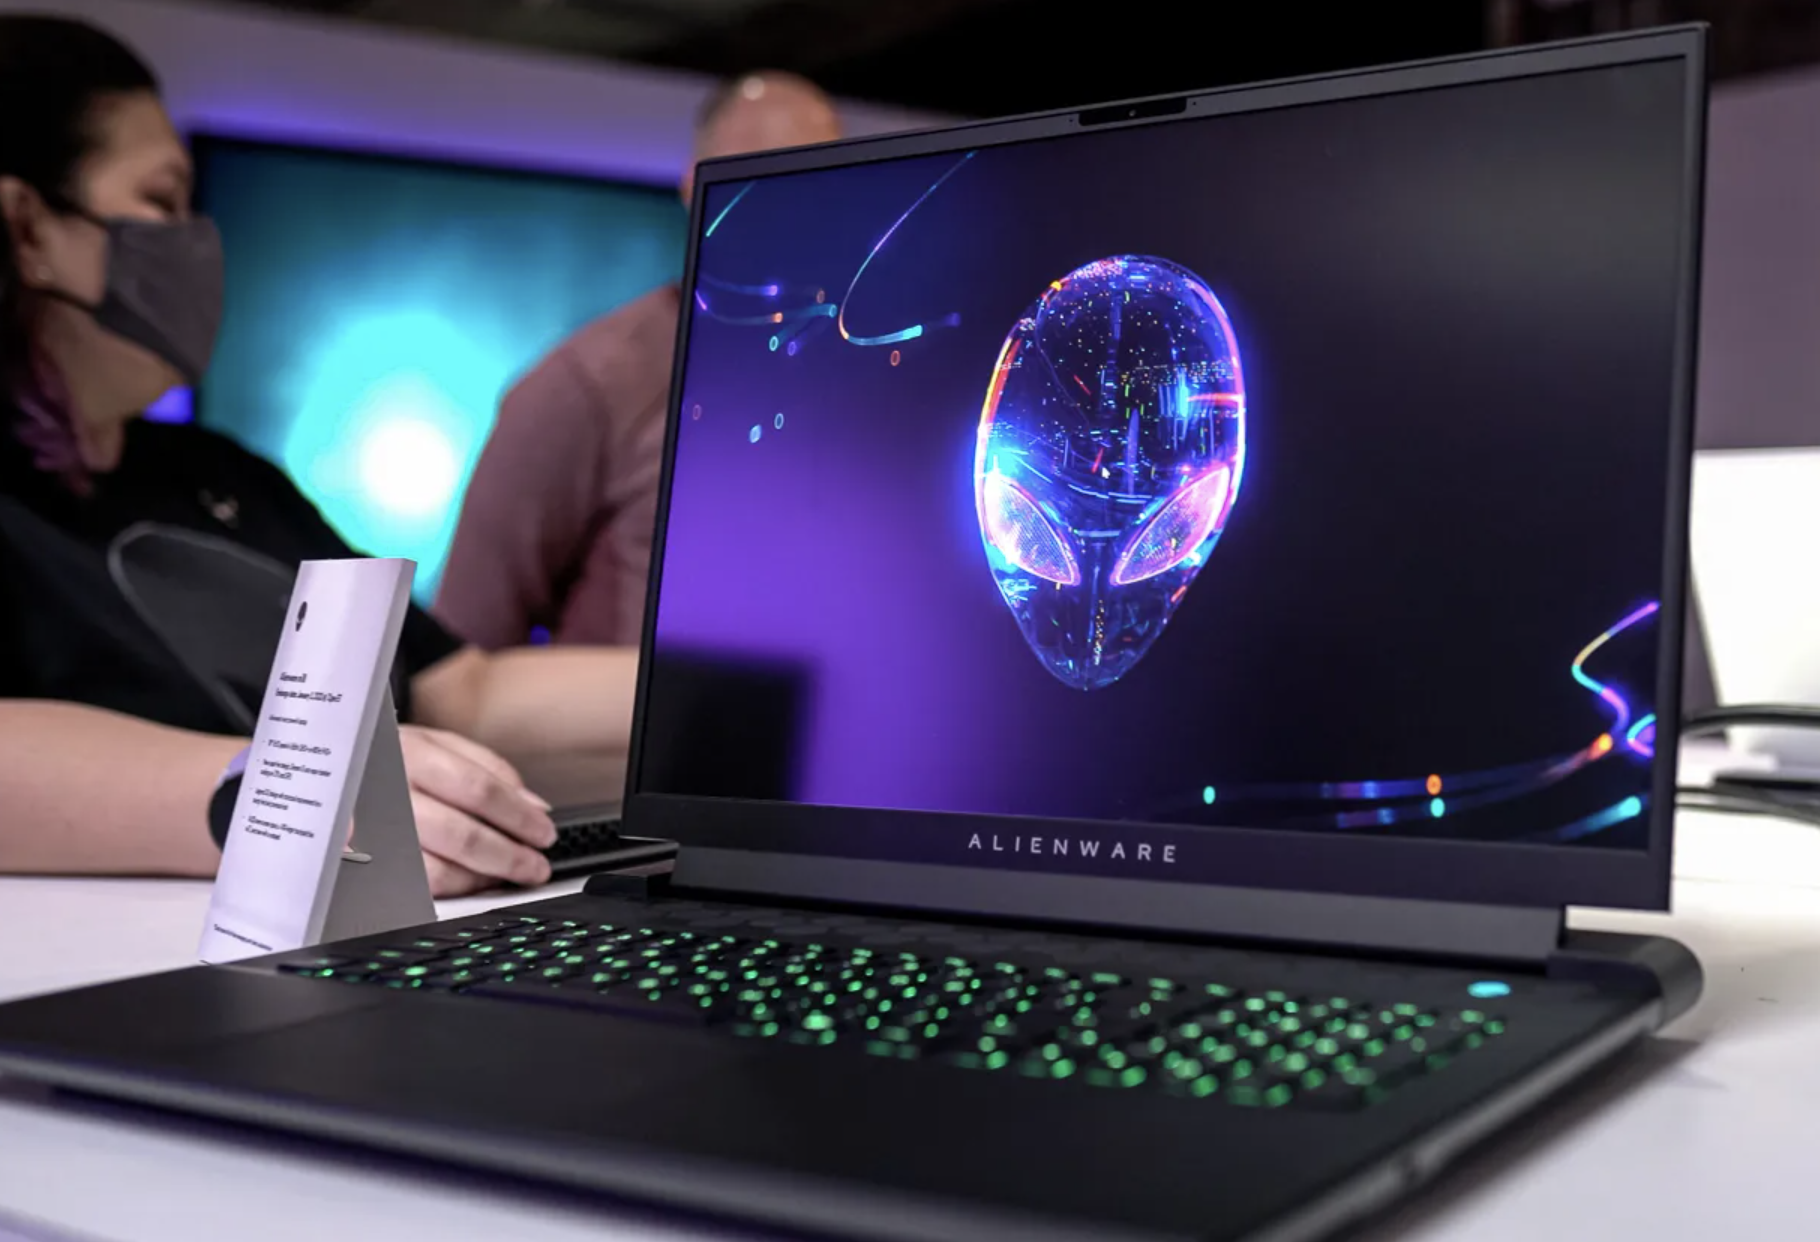 The Alienware m18 gaming laptop.